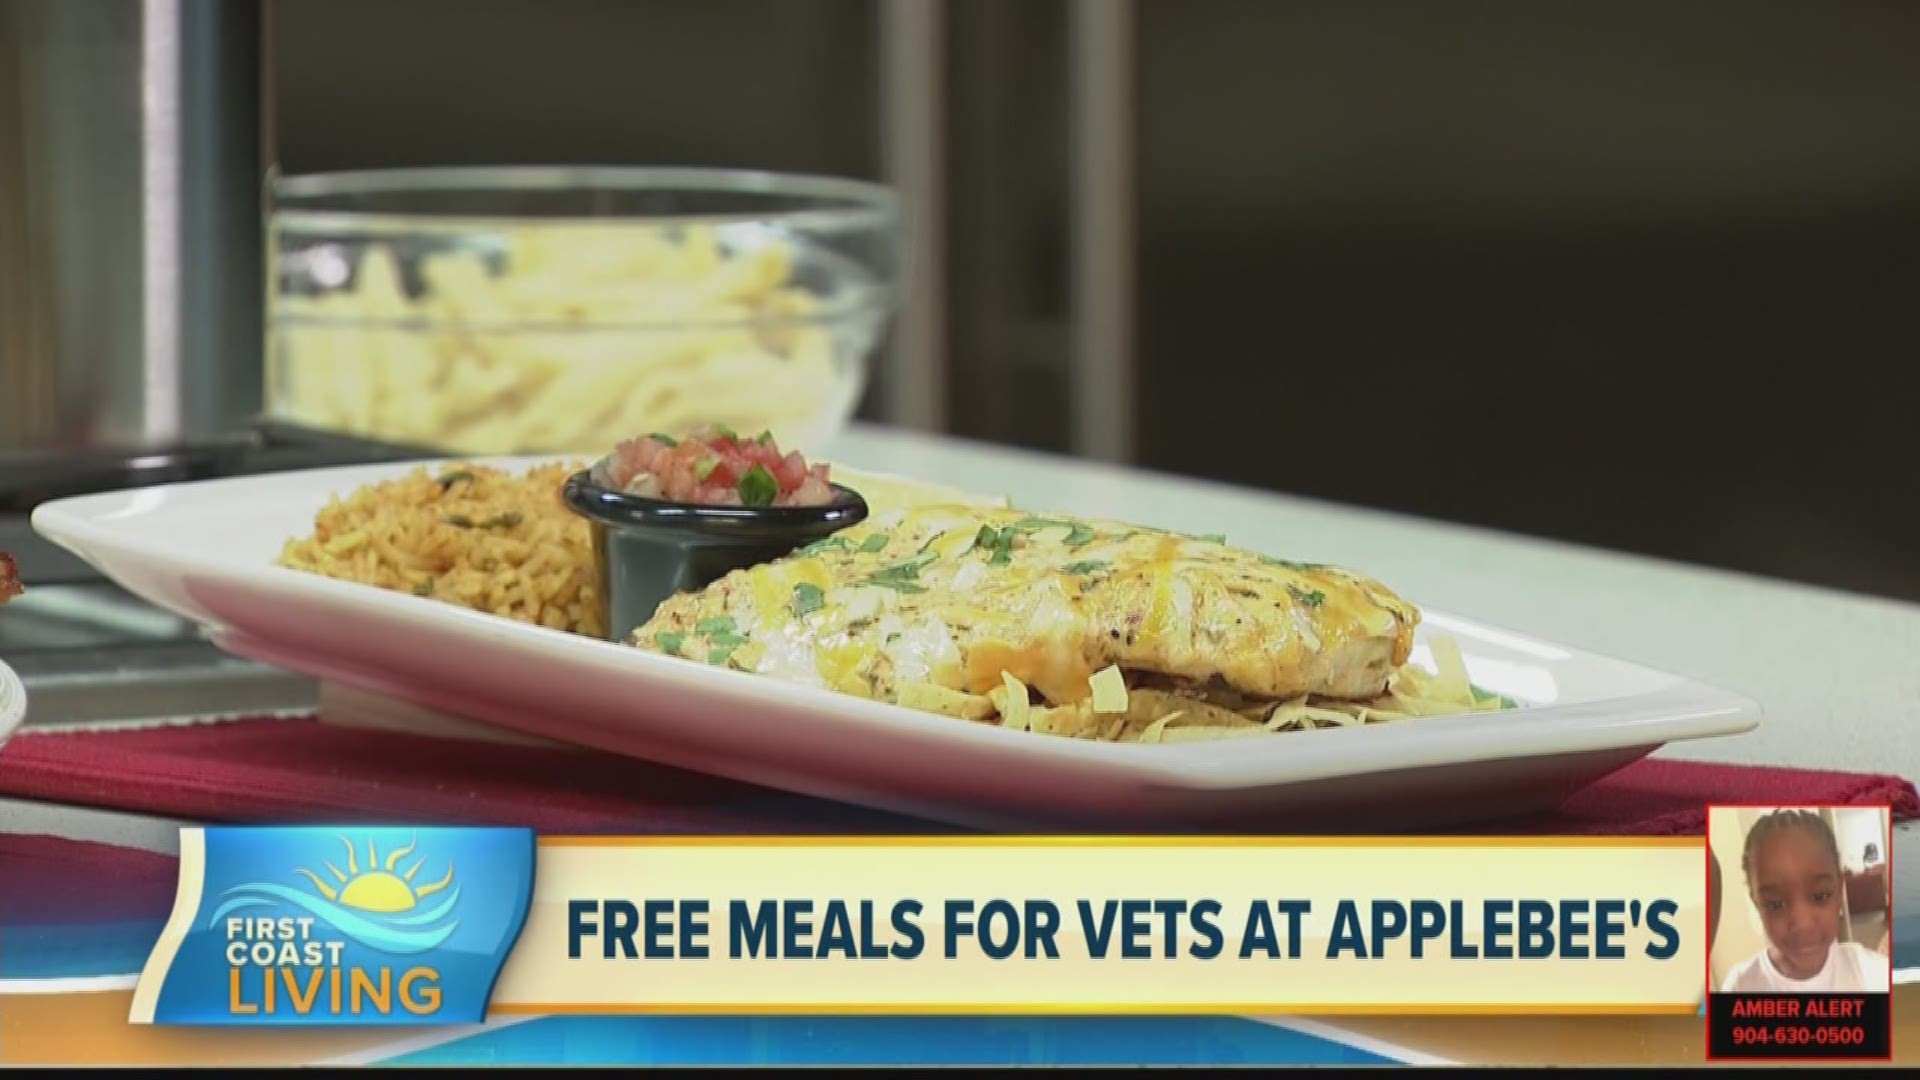 Applebee's has been serving free meals to veterans and active military members.